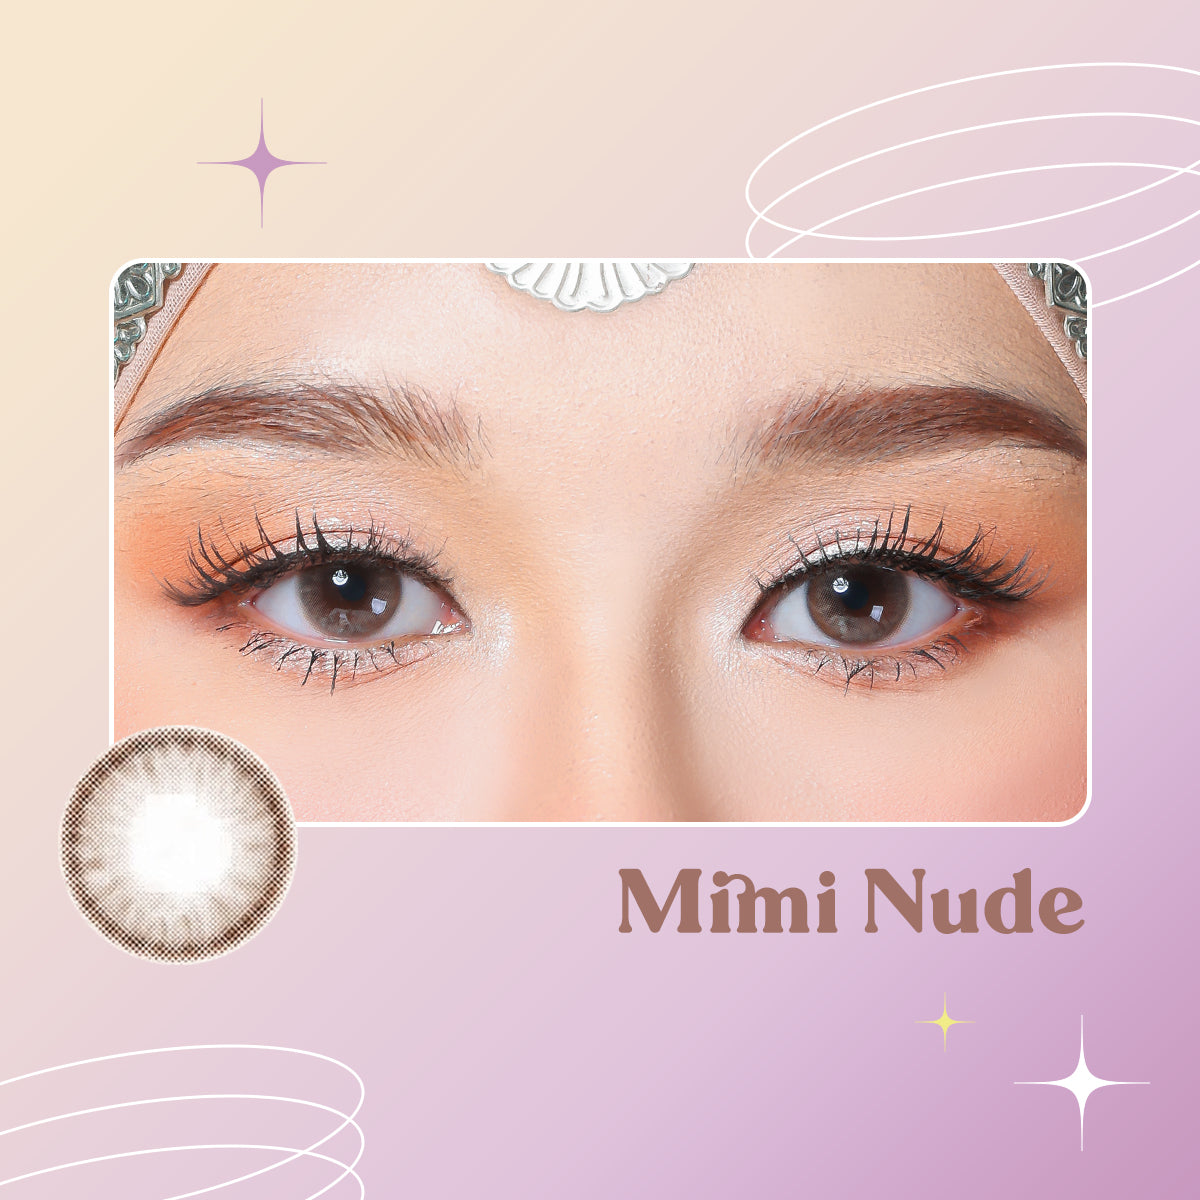 Mimi Nude 0-800 Micacon contact lens 100% Safe Certified by MDA